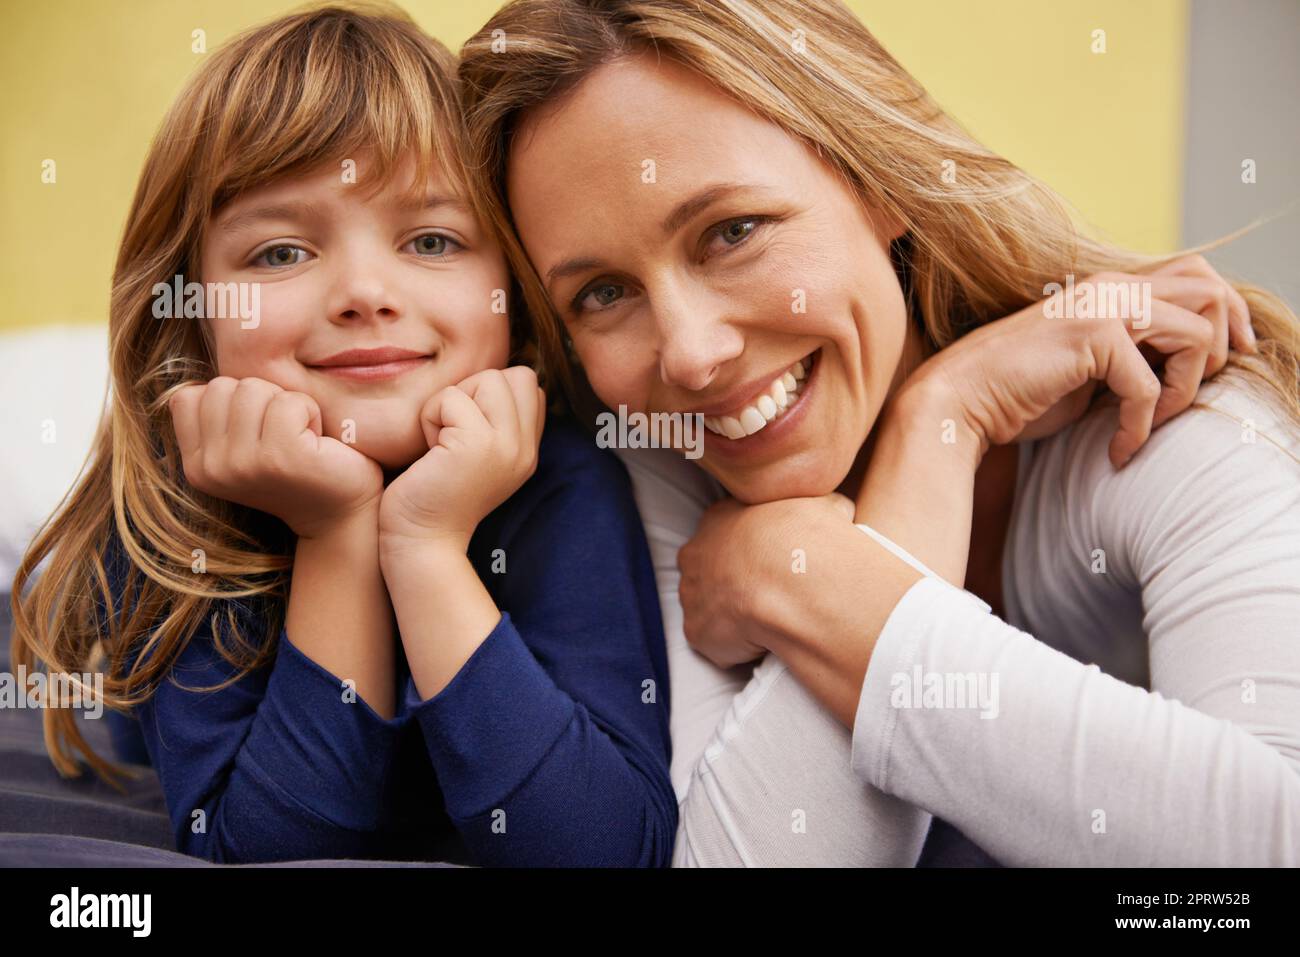 Shes so lovable. Portrait of a loving mother and daughter at home. Stock Photo